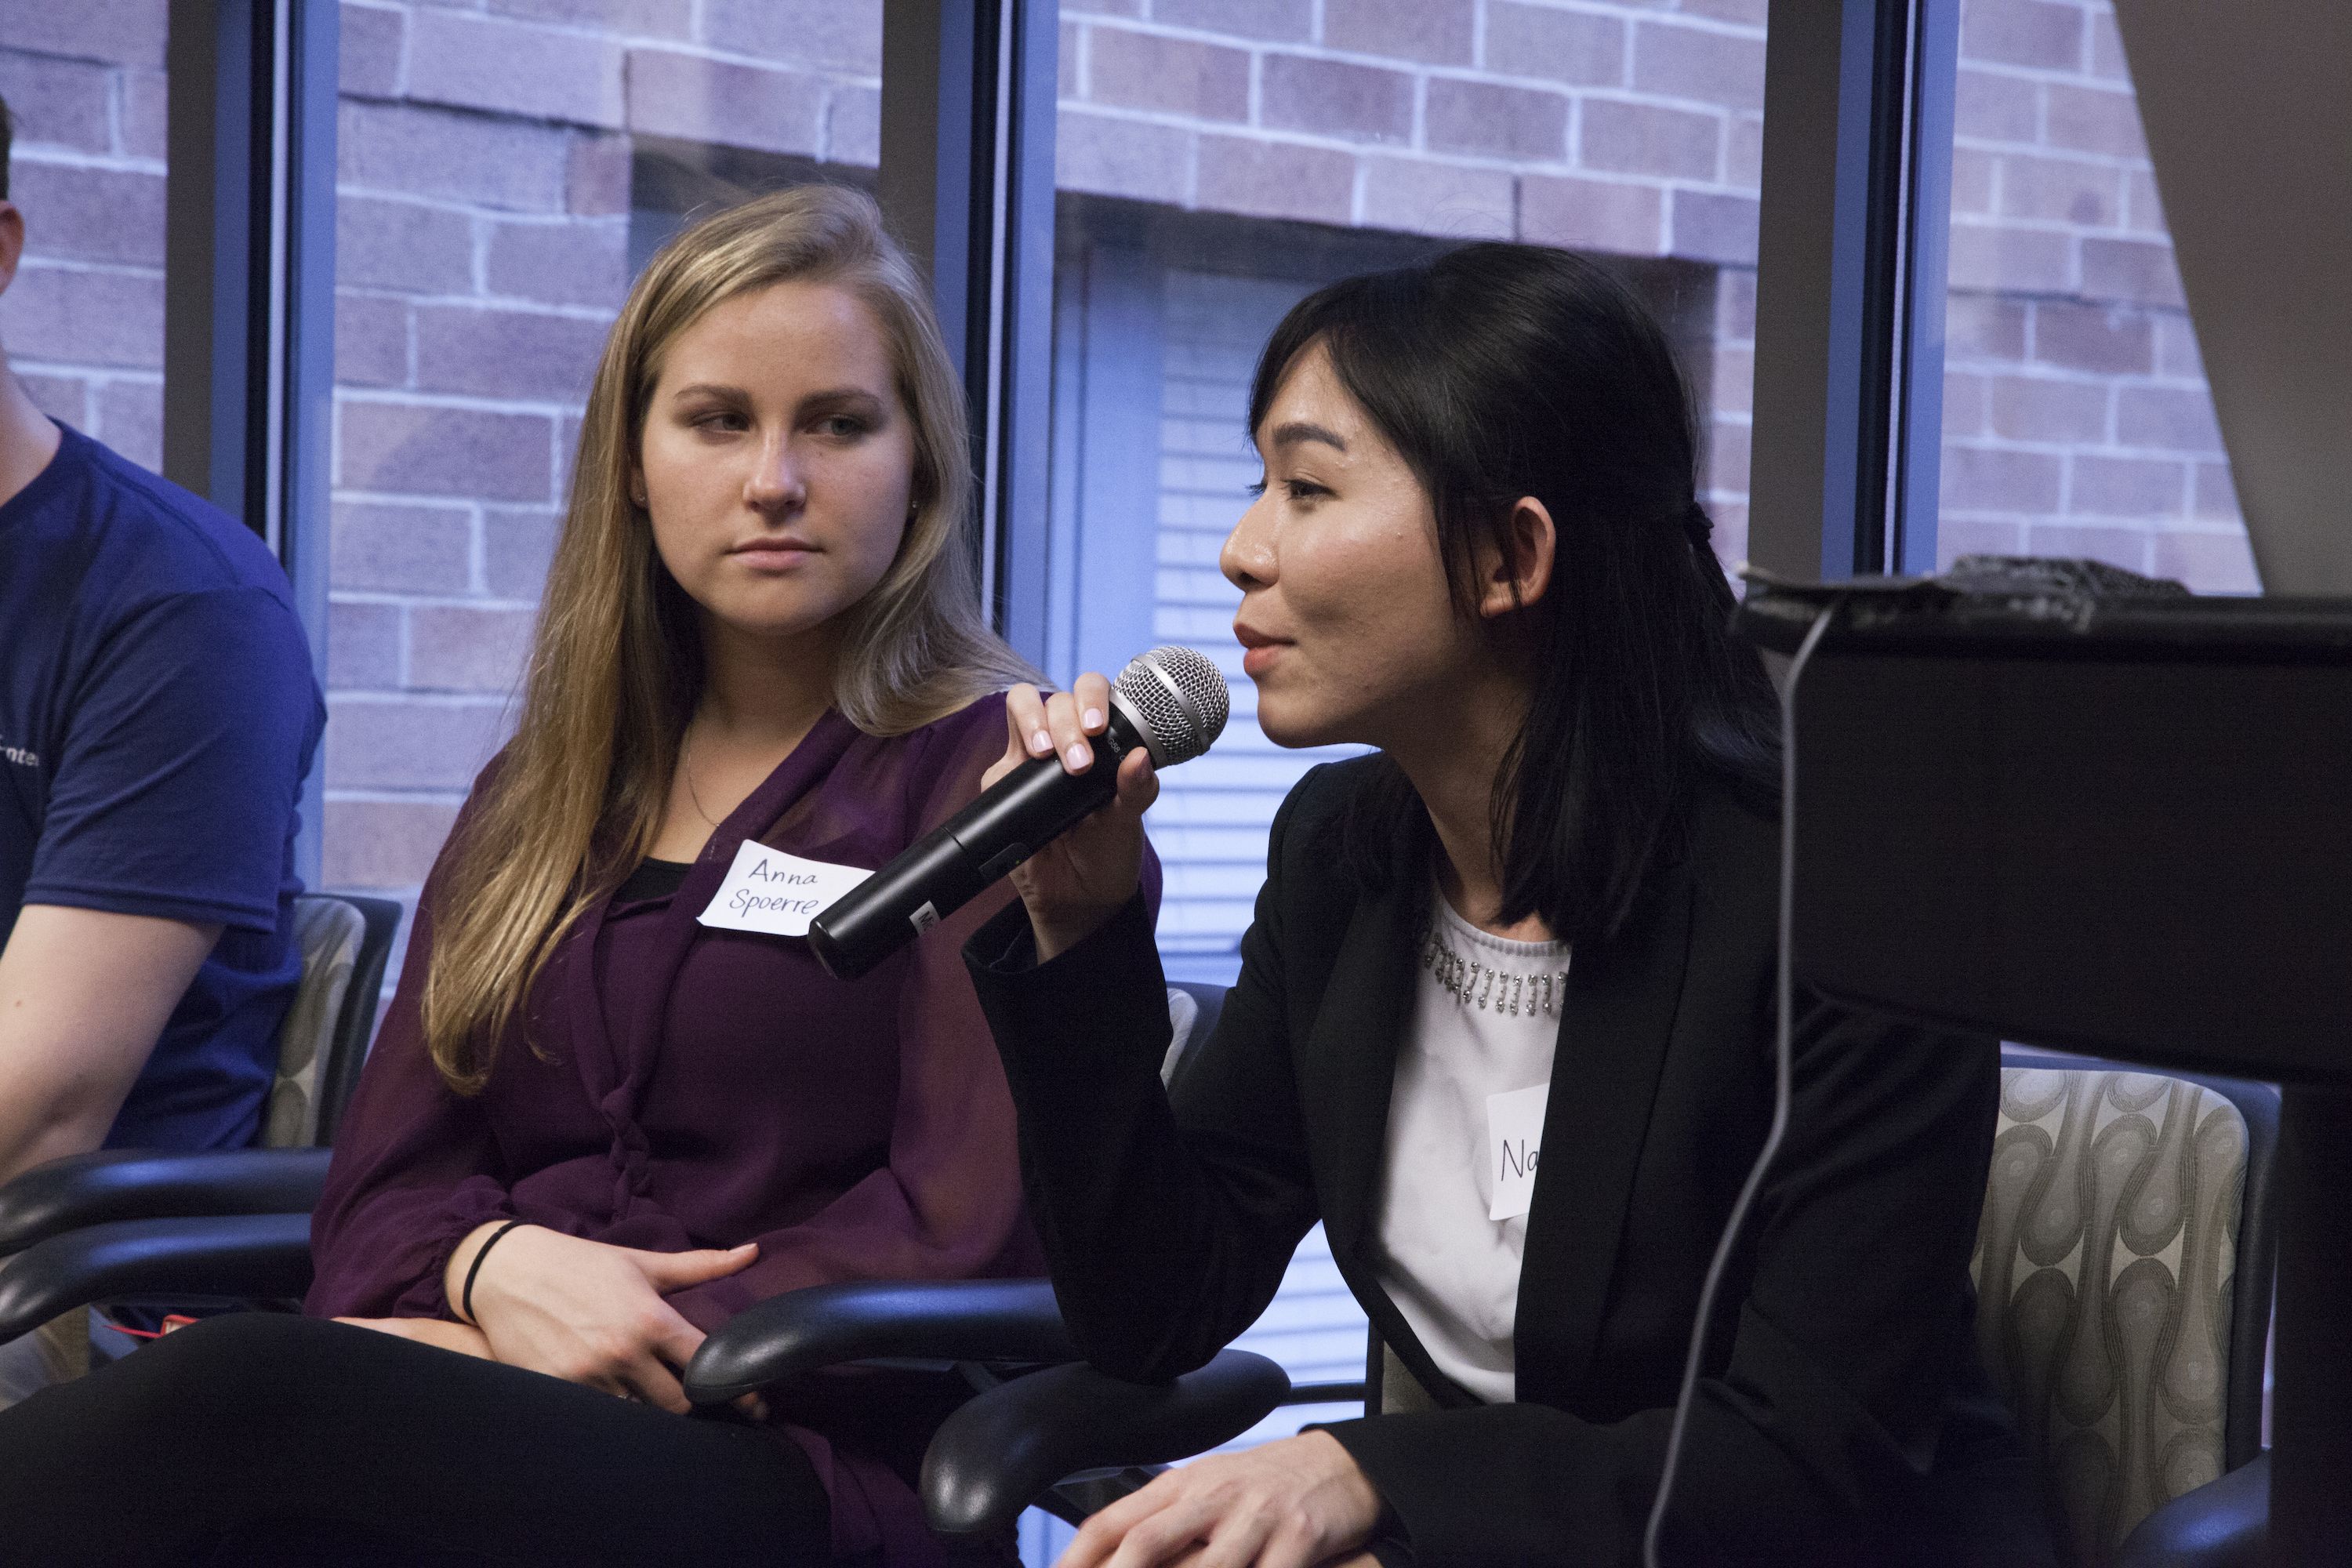 Natalie Au answers questions about her reporting on innovative solutions for gender equality in India. SIU Carbondale fellow Anna Spoerre listens, after presenting her project on Peru's public education system. Image by Jin Ding. Washington, D.C., 2016.